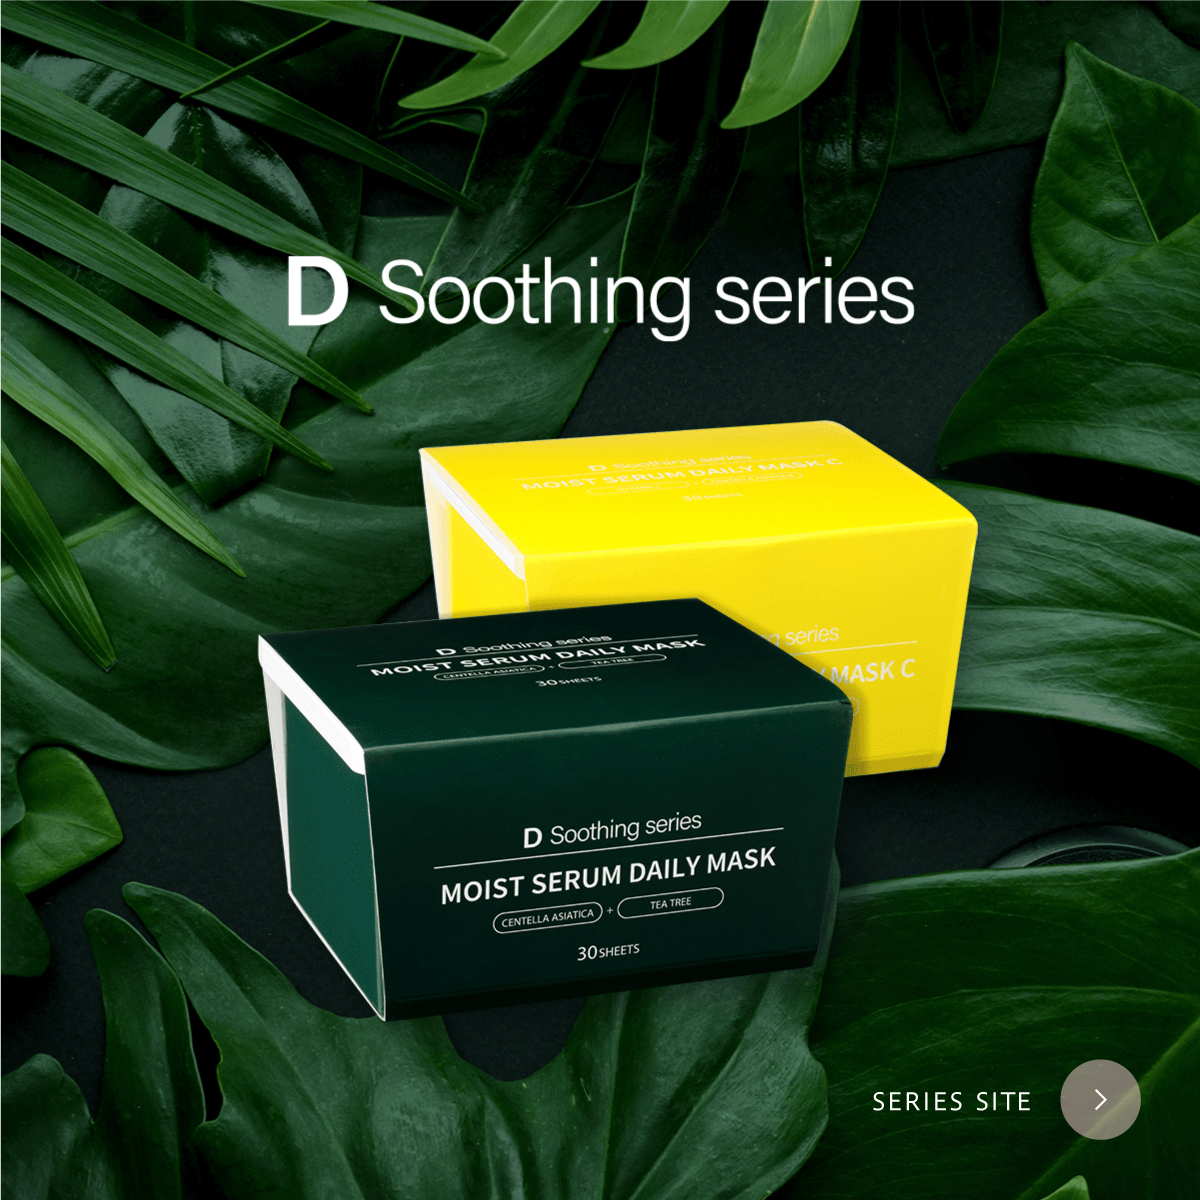 D Soothing series